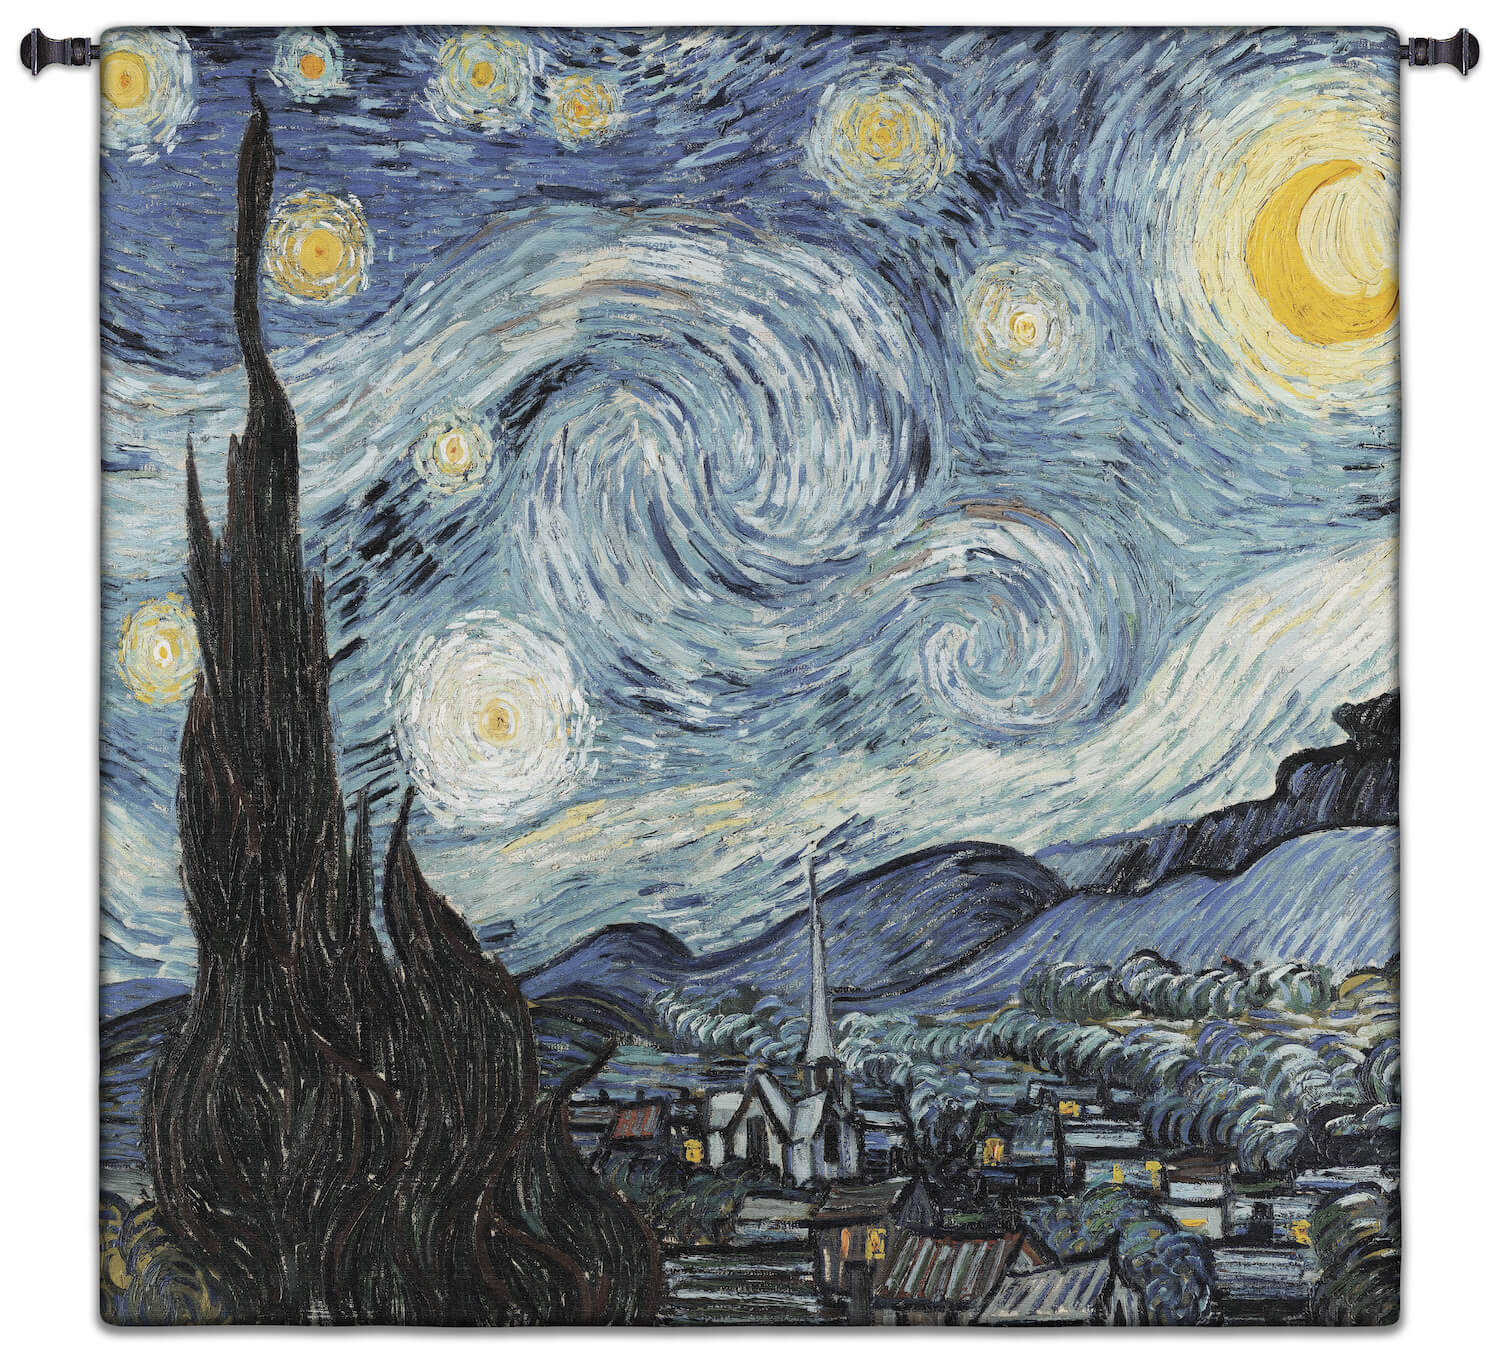 Starry Night Van Gogh Square Wall Tapestry Abstract, Art, S, Starry, Night, Carolina, USAwoven, Cotton, Gogh, Hanging, Seller, Square, Tapestries, Tapestry, Top50, Van, Wall, White, Woven, Woven, Bestseller, tapestries, tapestrys, hangings, and, the, exclusive